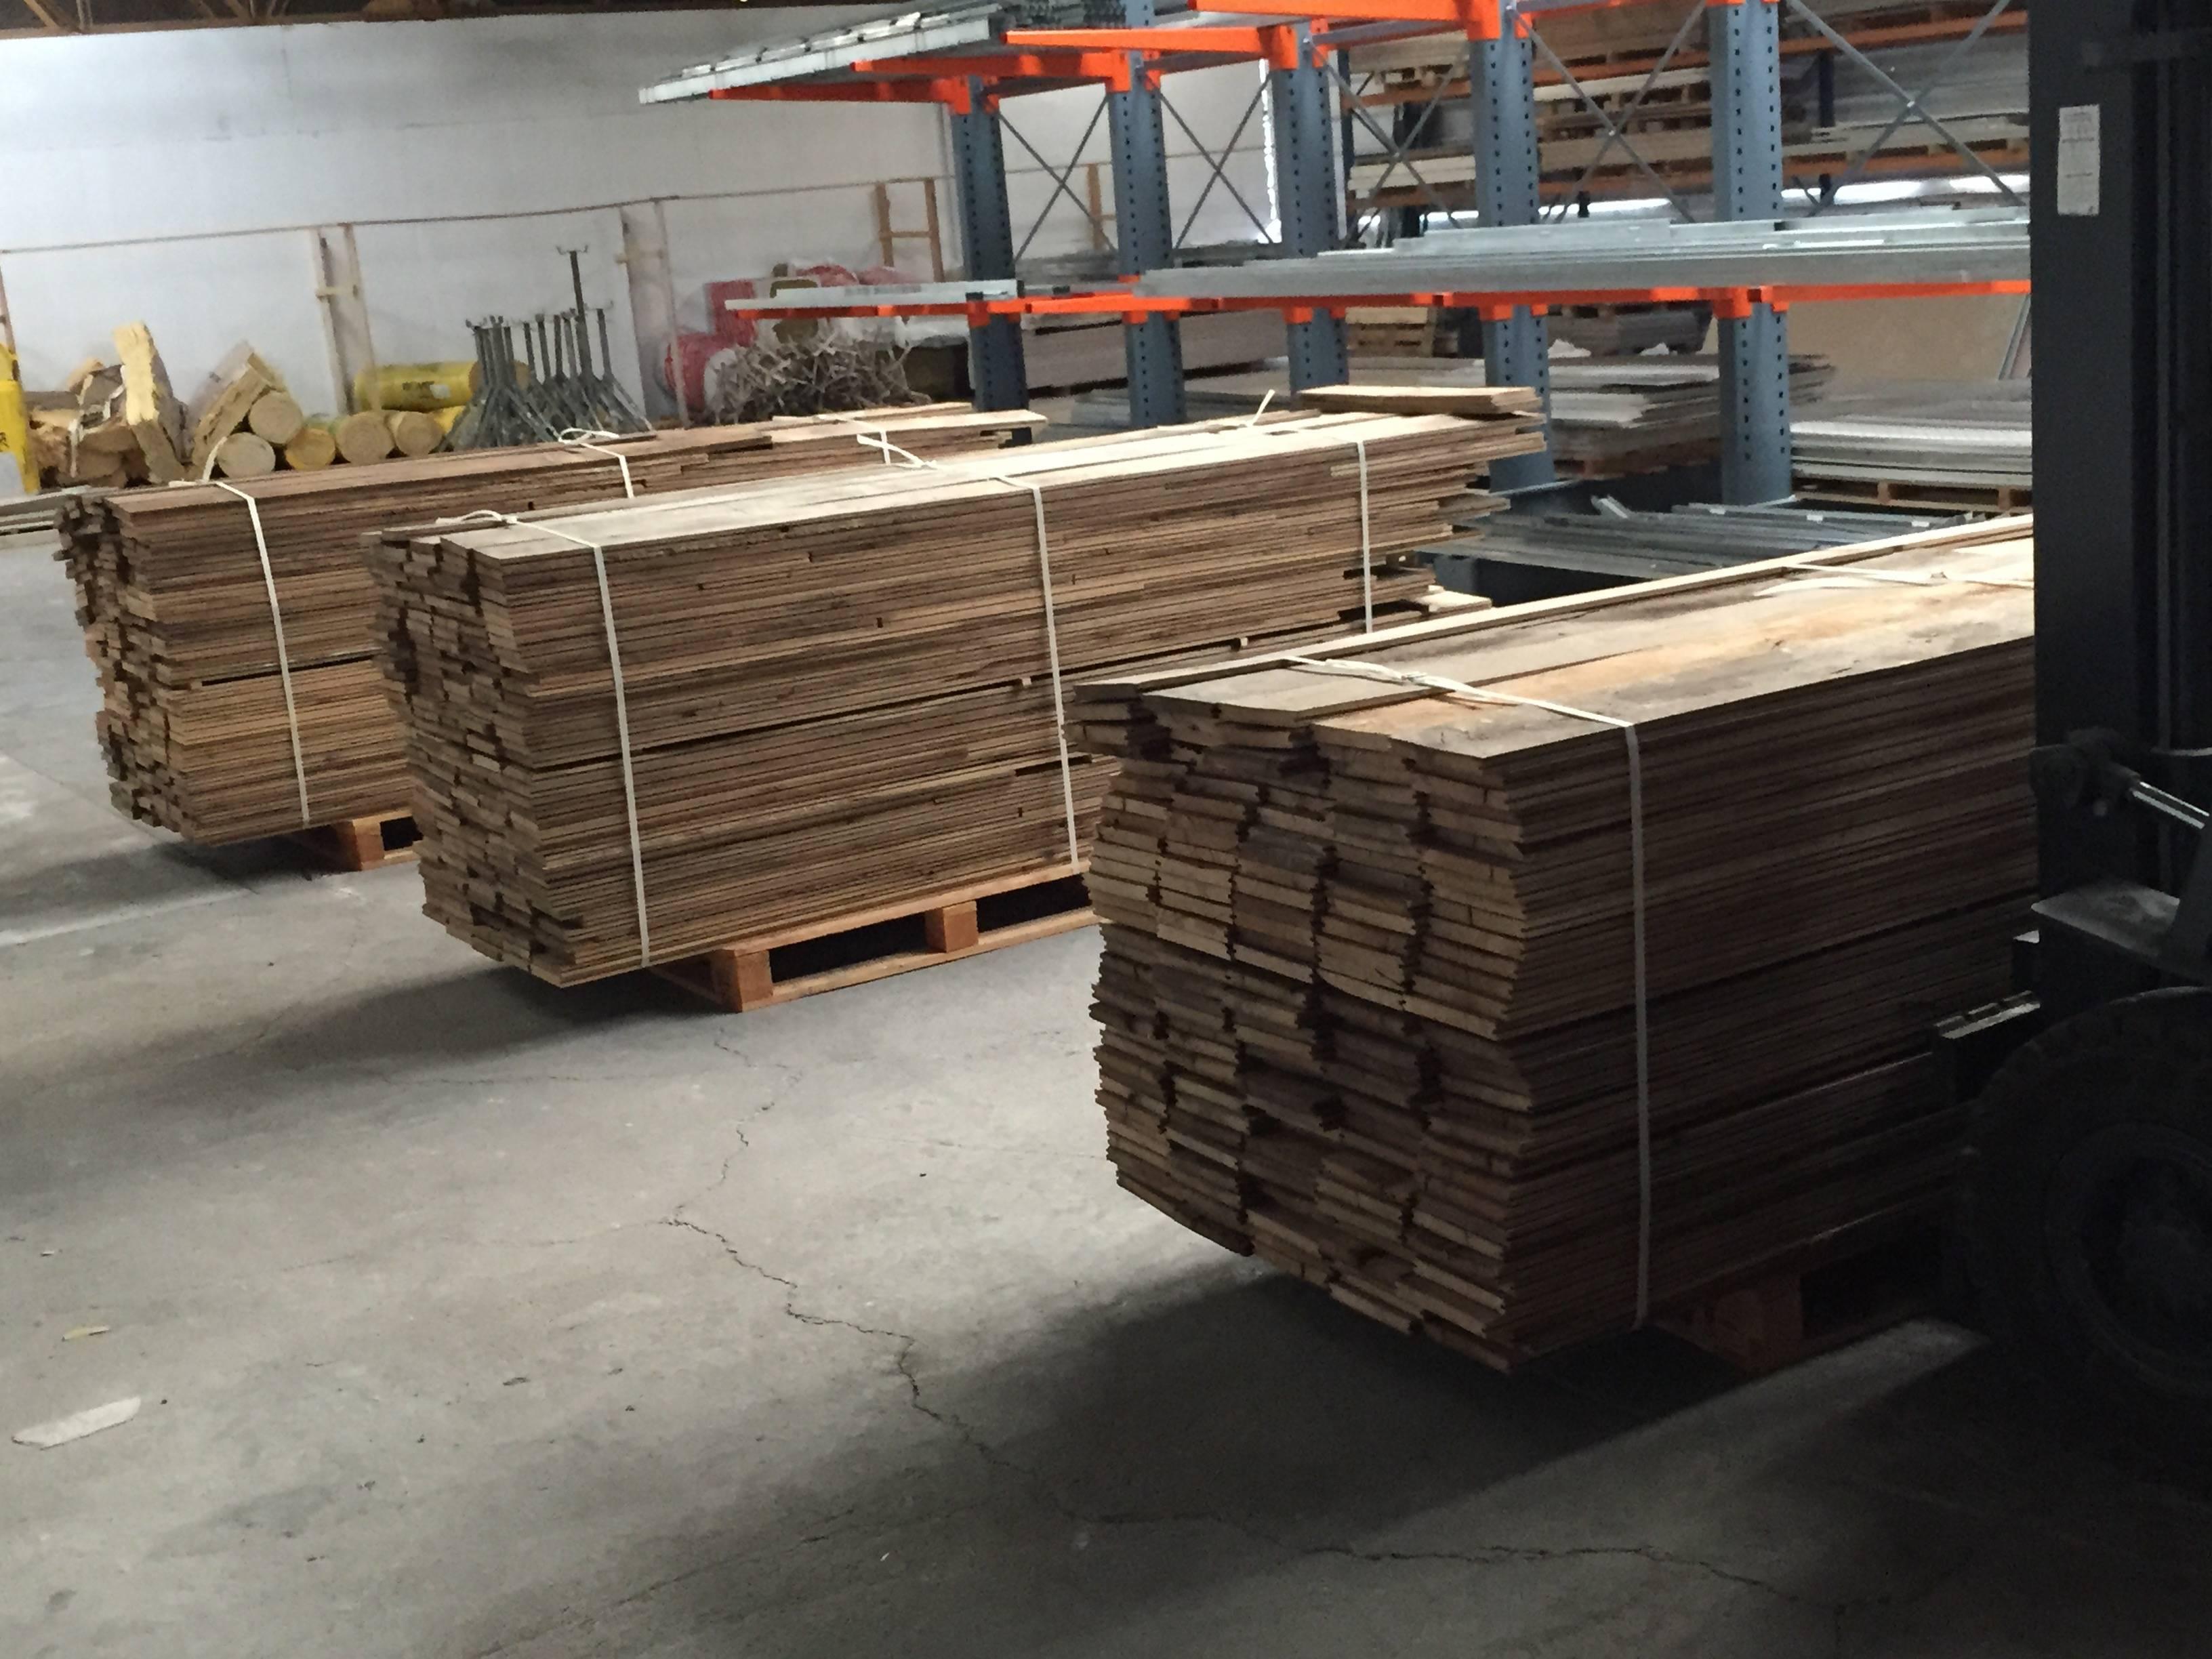 Authentic reclaimed French wood oak floors from 18th century.
Each planks have been man-handled and re-worked, ready for installation.

We have a large inventory available.
Thickness at 1 inch.

Around 3,500 square feet available for